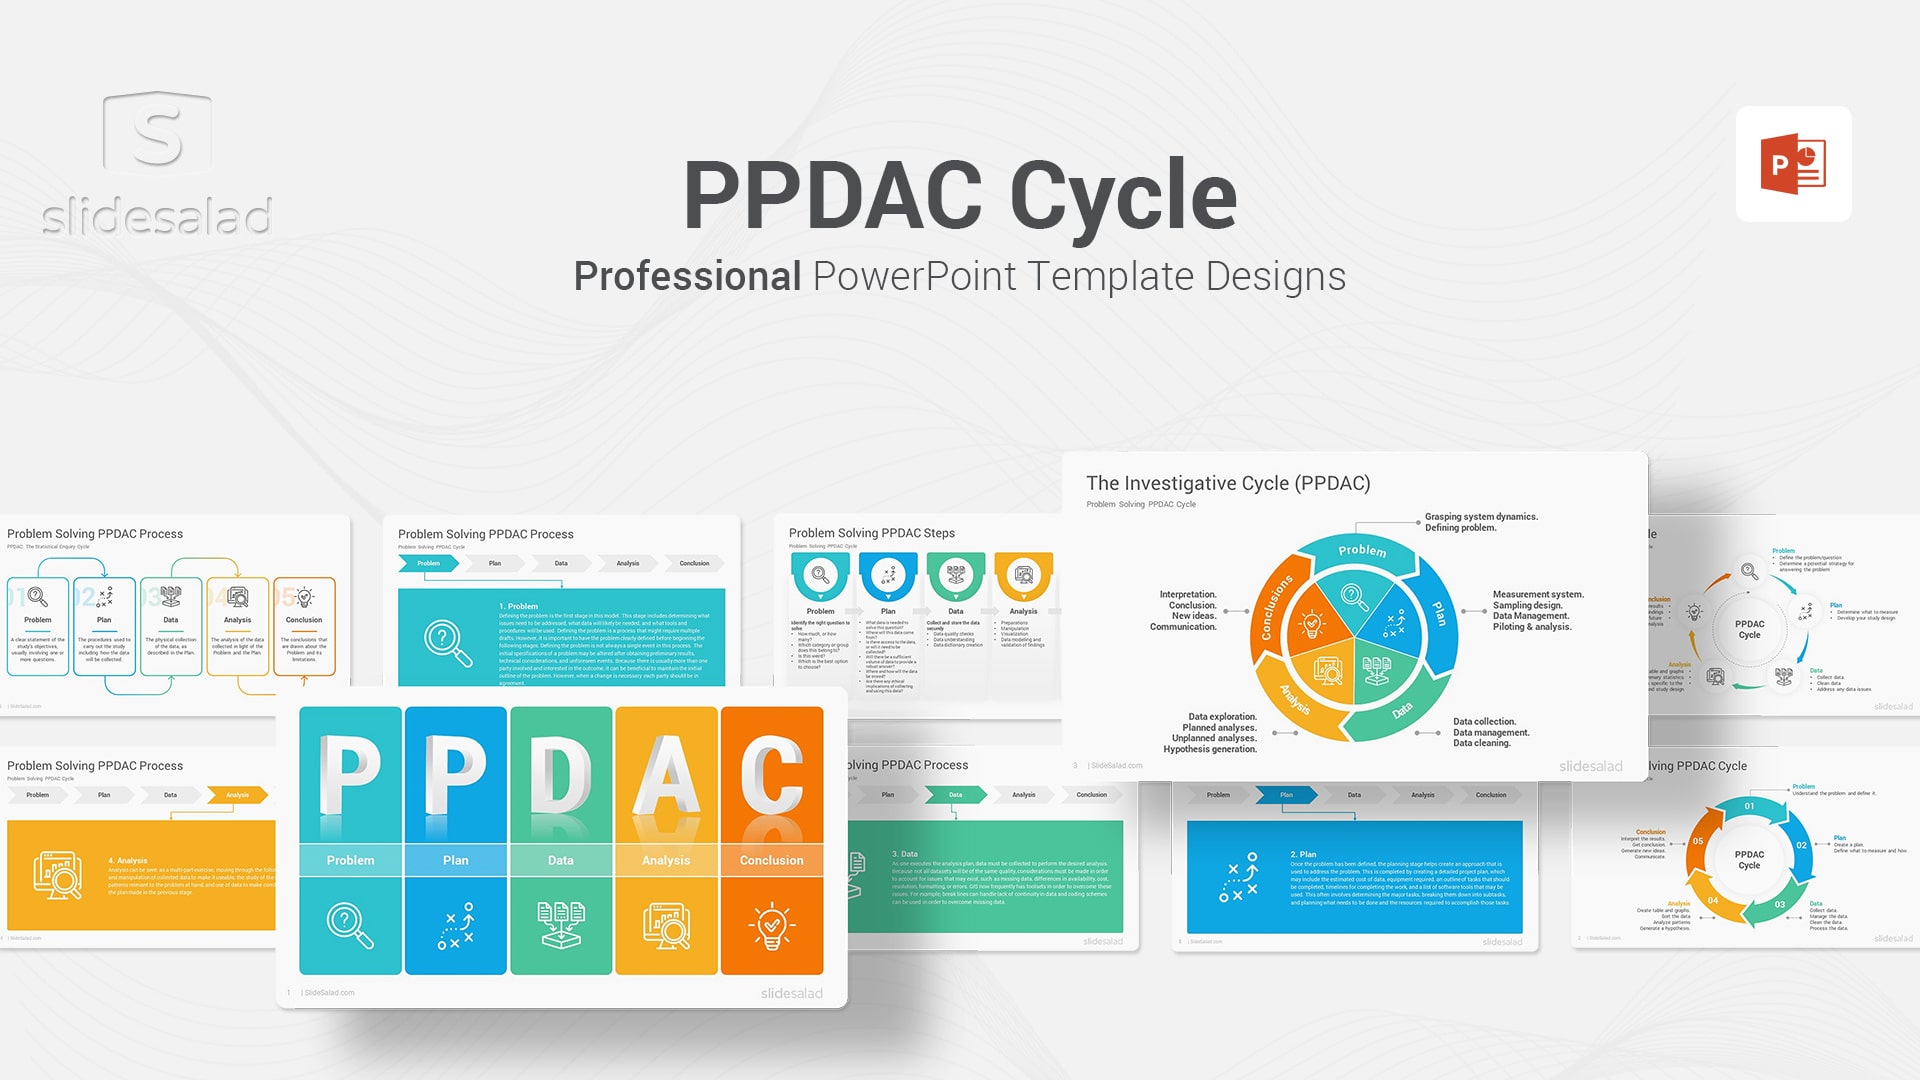 PPDAC Cycle PowerPoint Template Diagrams - Make a Complete PowerPoint Presentation on the Top Problem Solving Methodology for Solving the Real-World Problems With PPDAC Cycle